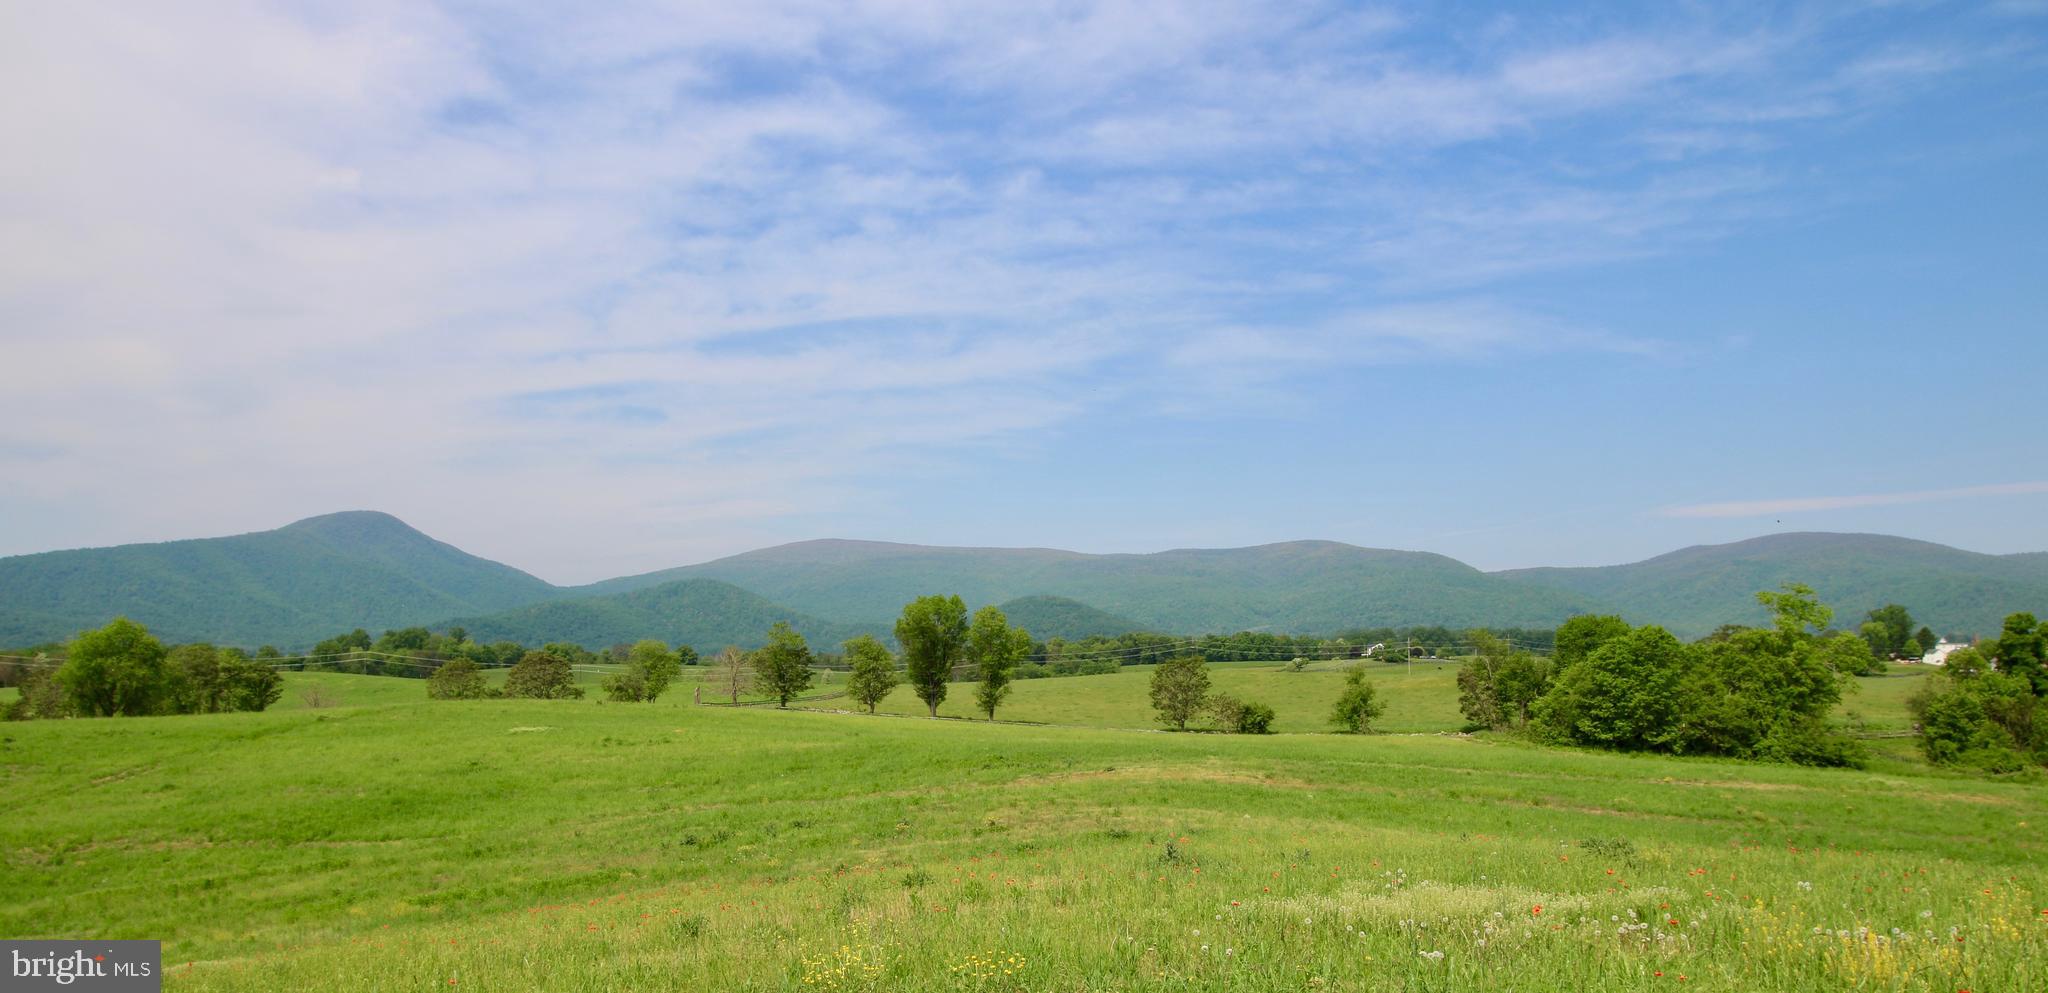 a view of grassy field and mountains